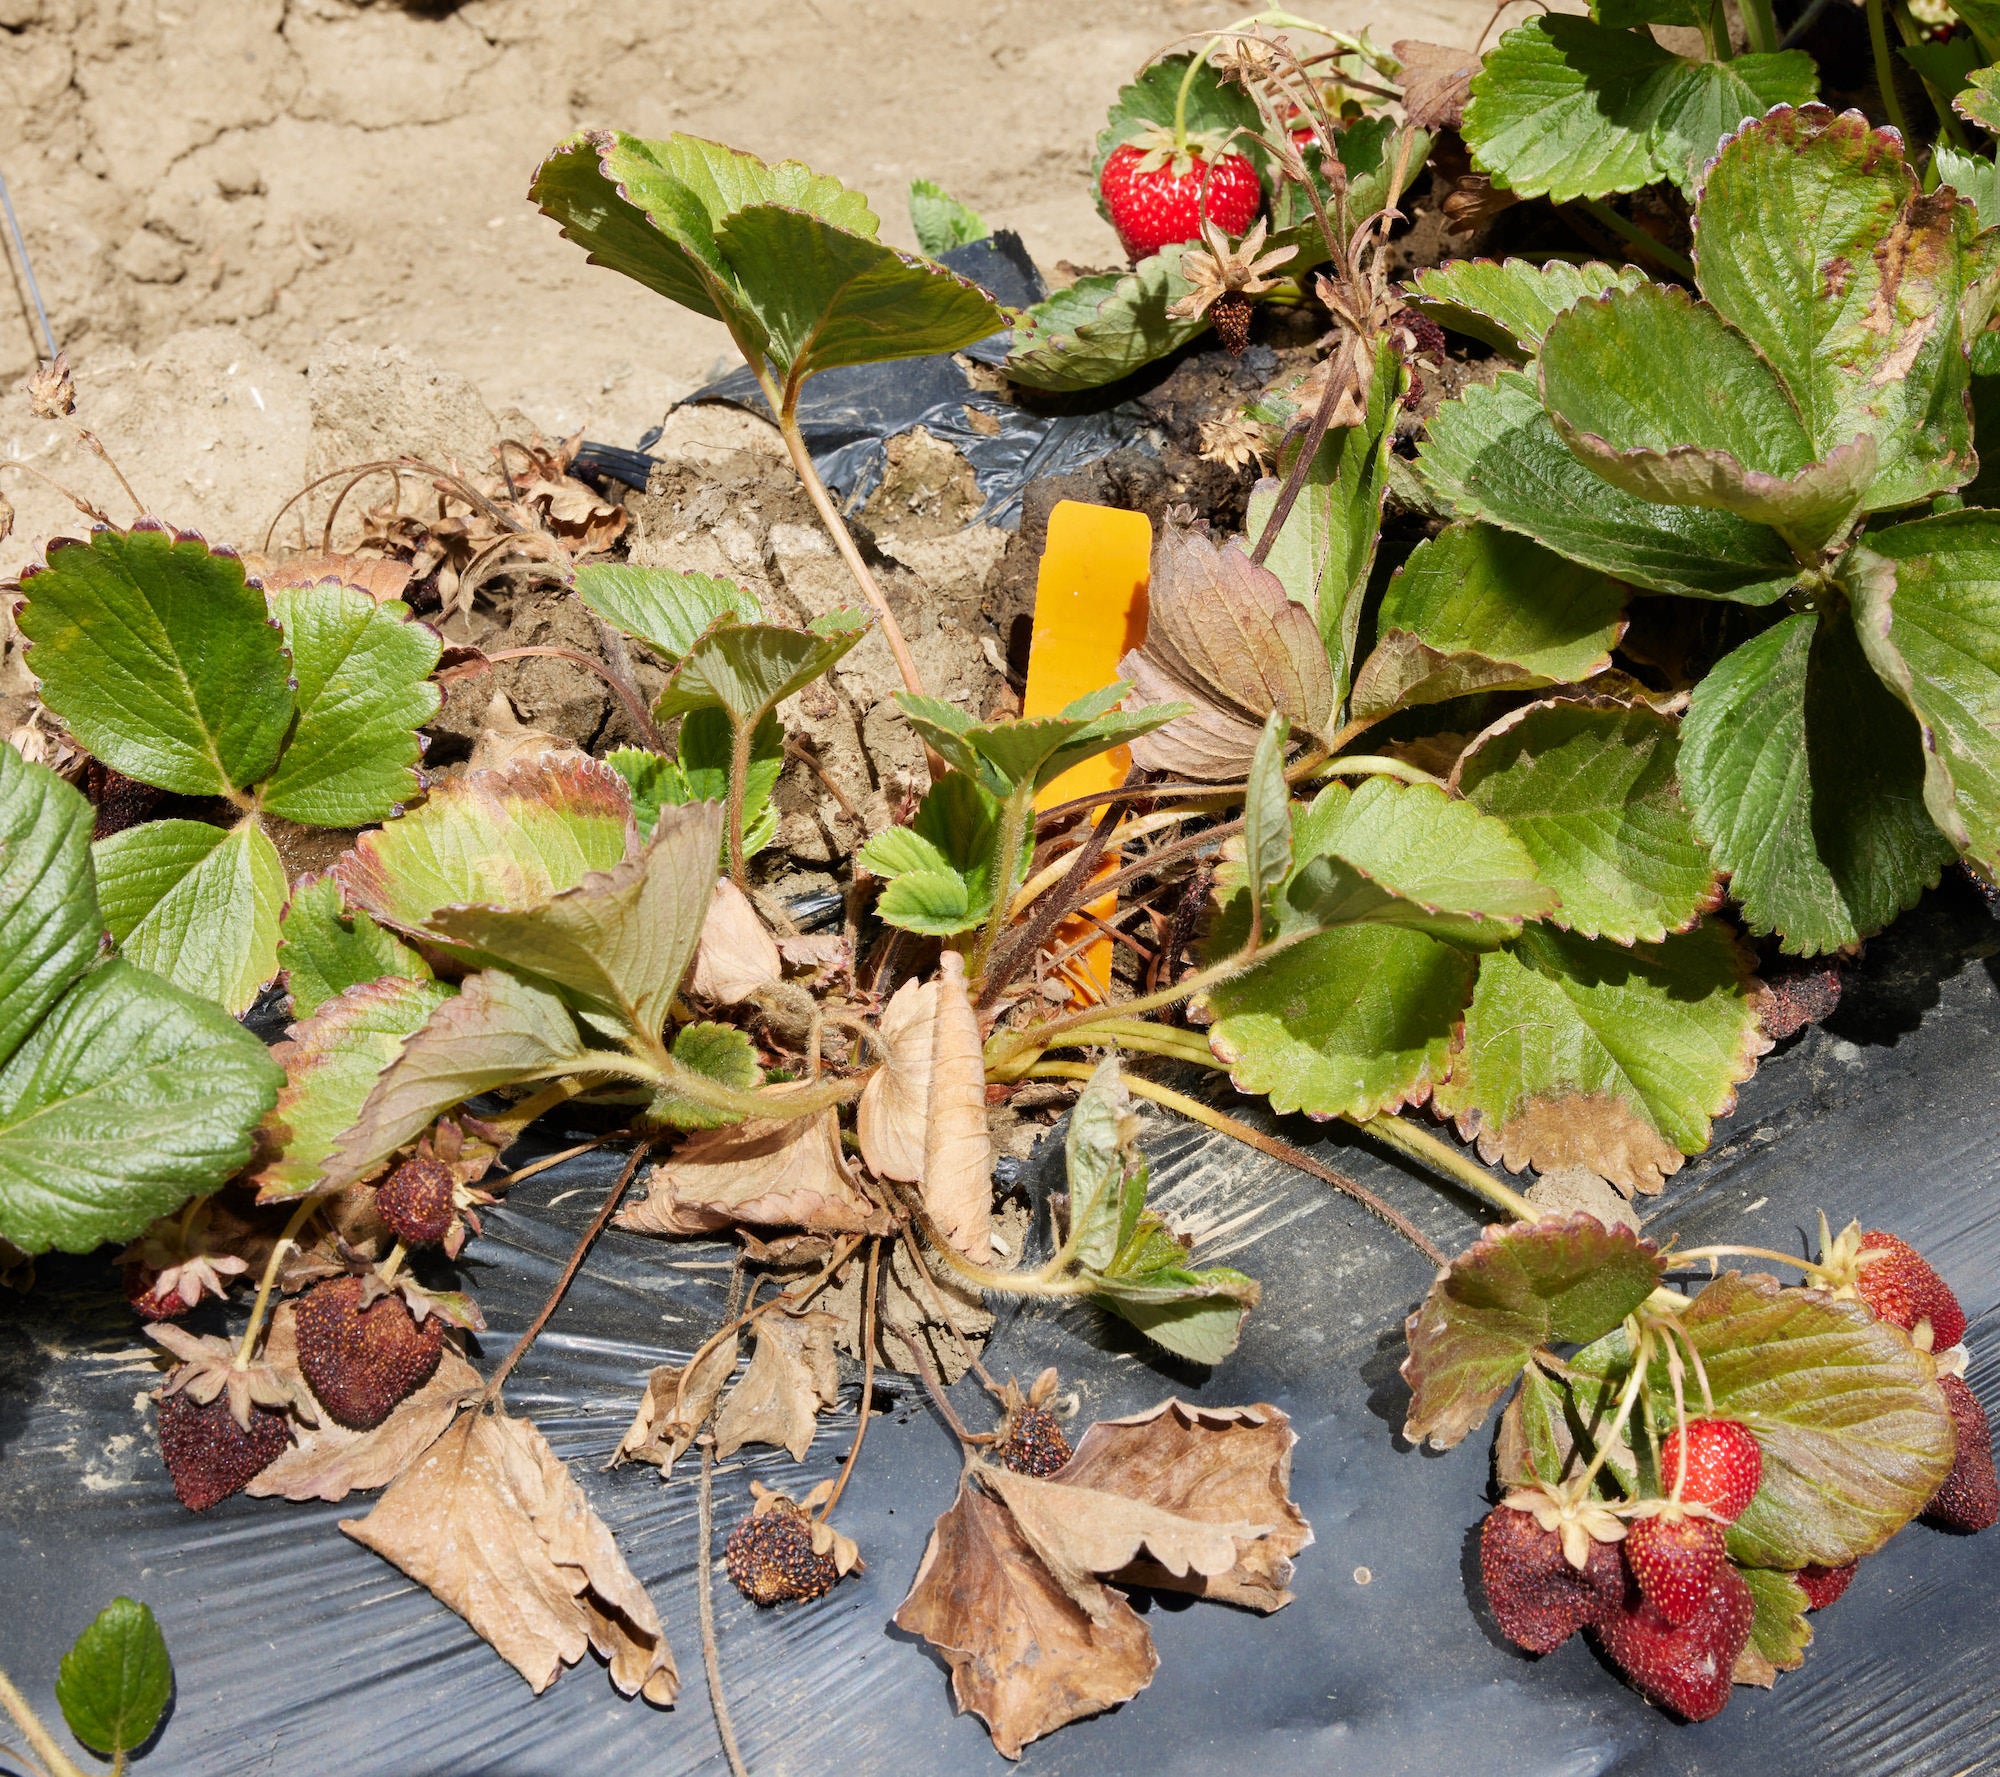 Strawberry plant affected by Fusarium wilt